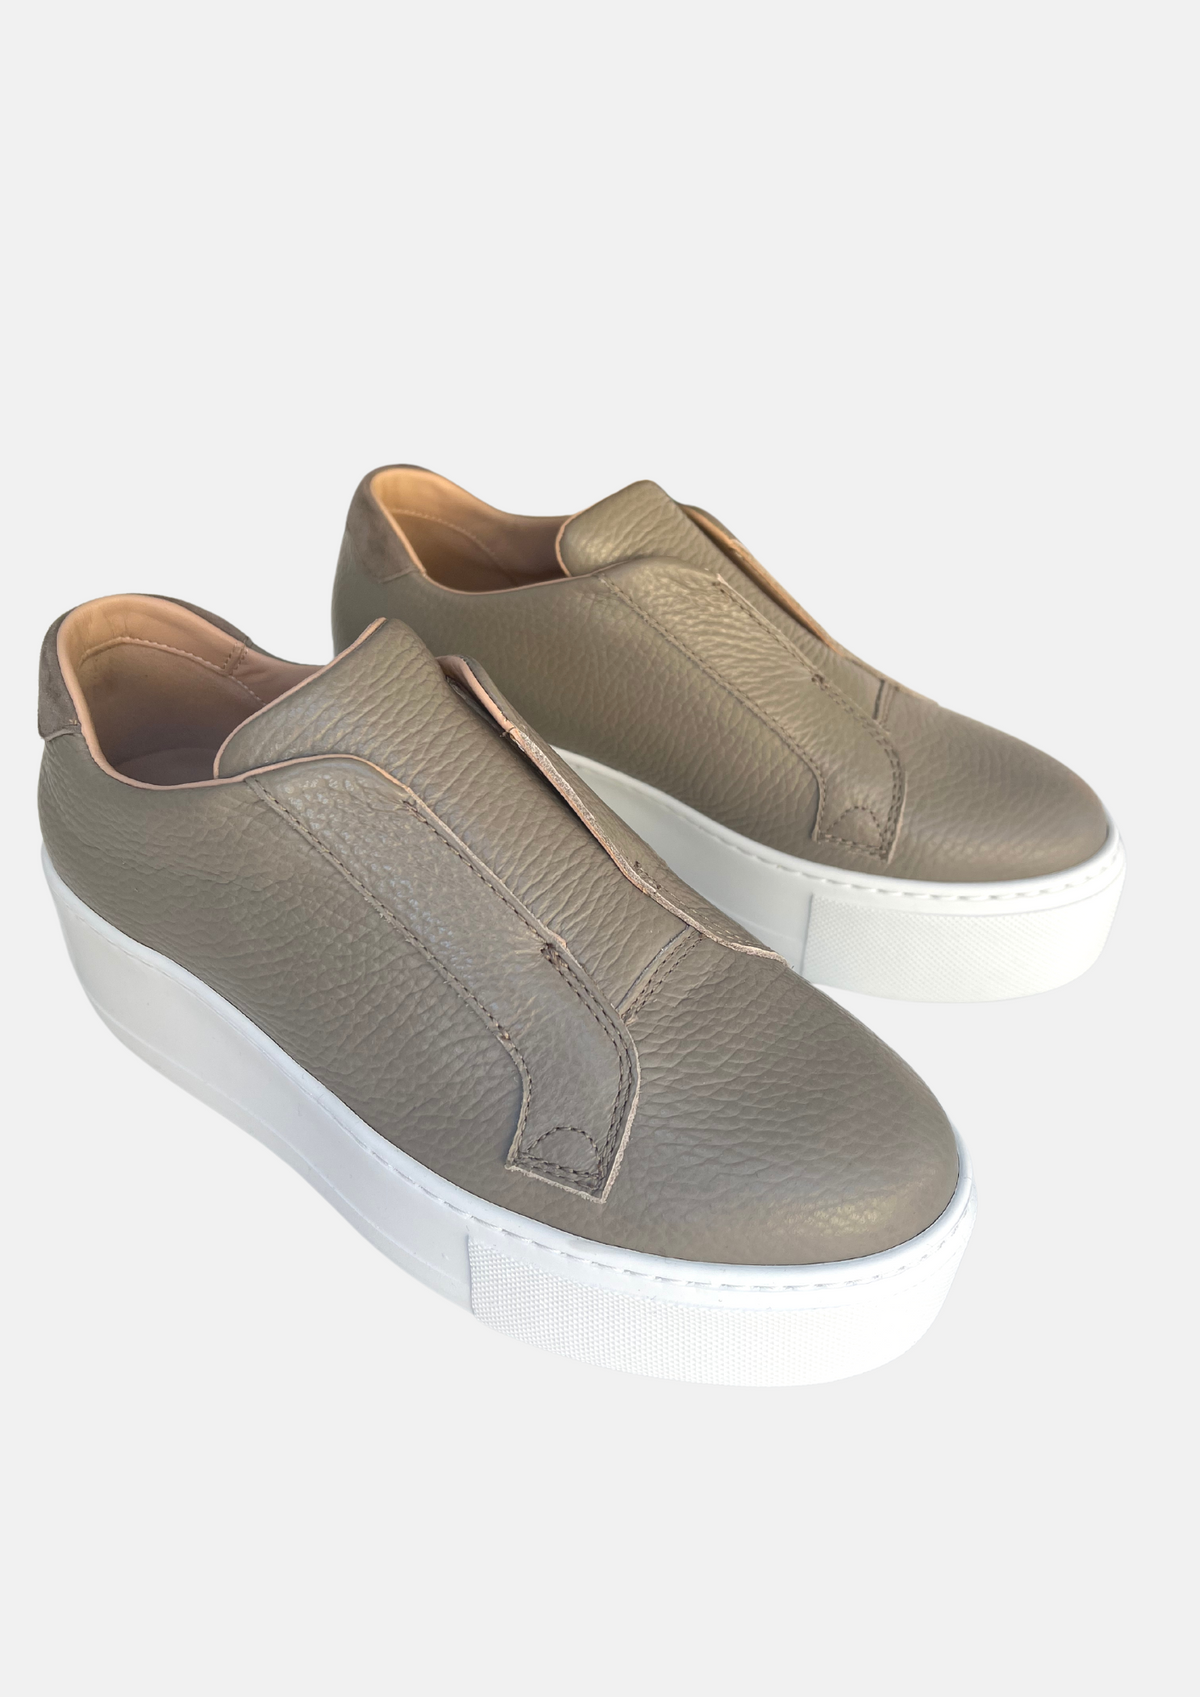 Pull on Italian leather platform trainers in  taupe